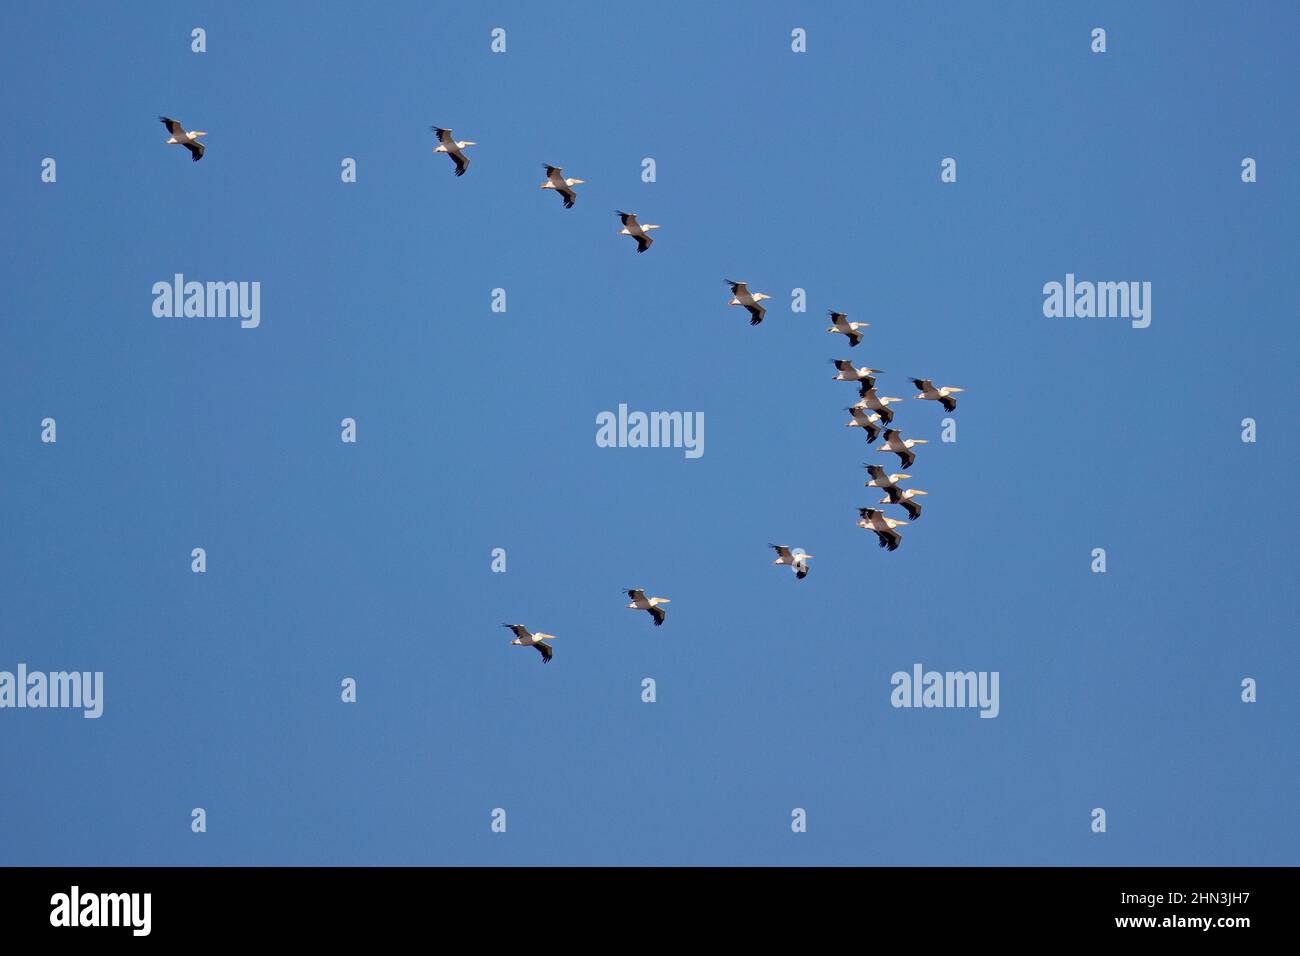 Flock of Great White Pelicans flying in clear blue sky over the Hula Valley, a major flyway for bird migration between Europe, Asia & Africa Stock Photo